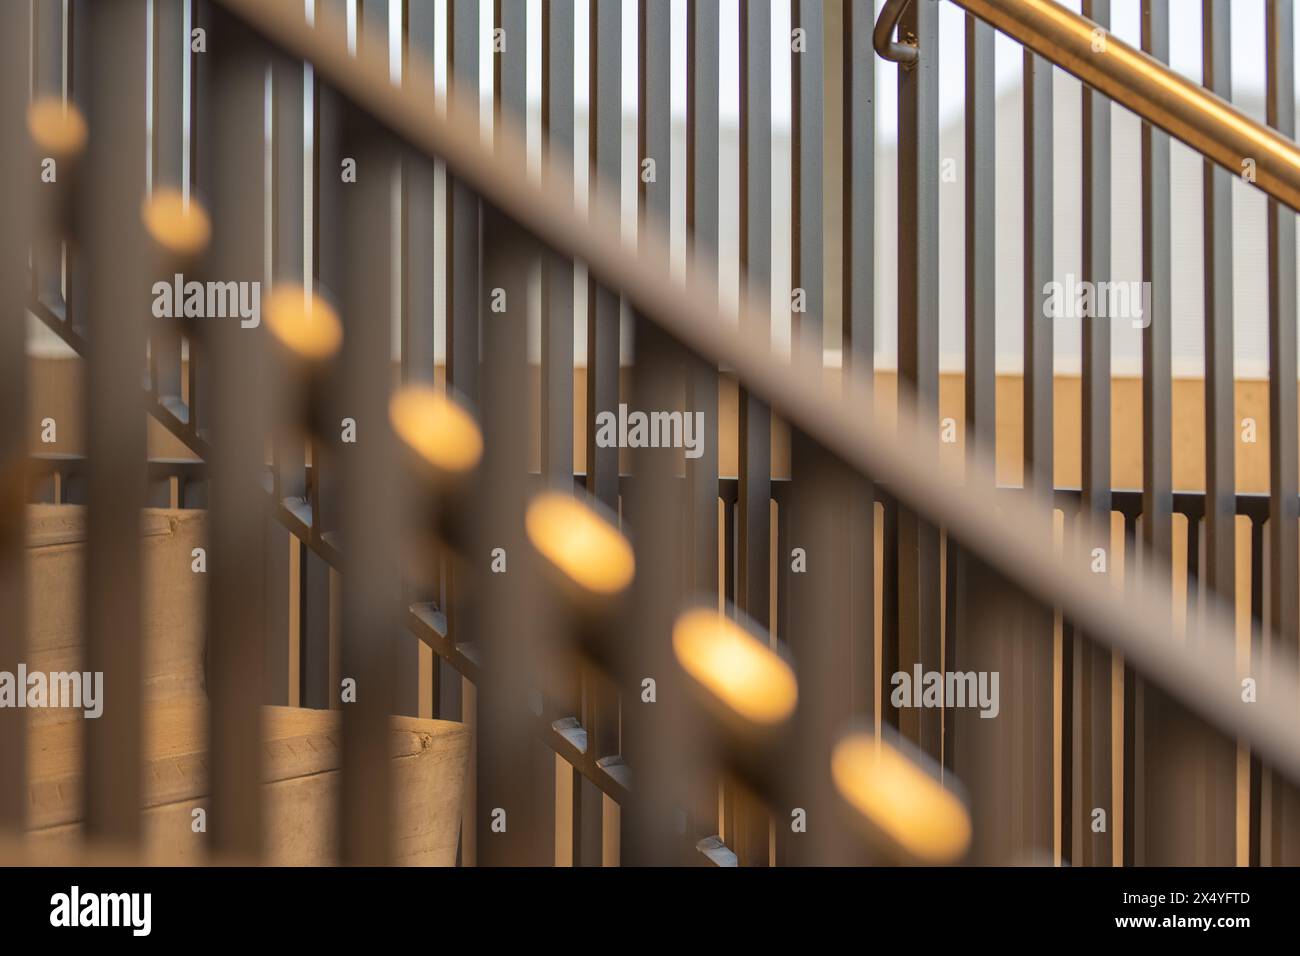 Close-up photo of a modern gray metal railing and concrete stair case between floors. Stock Photo